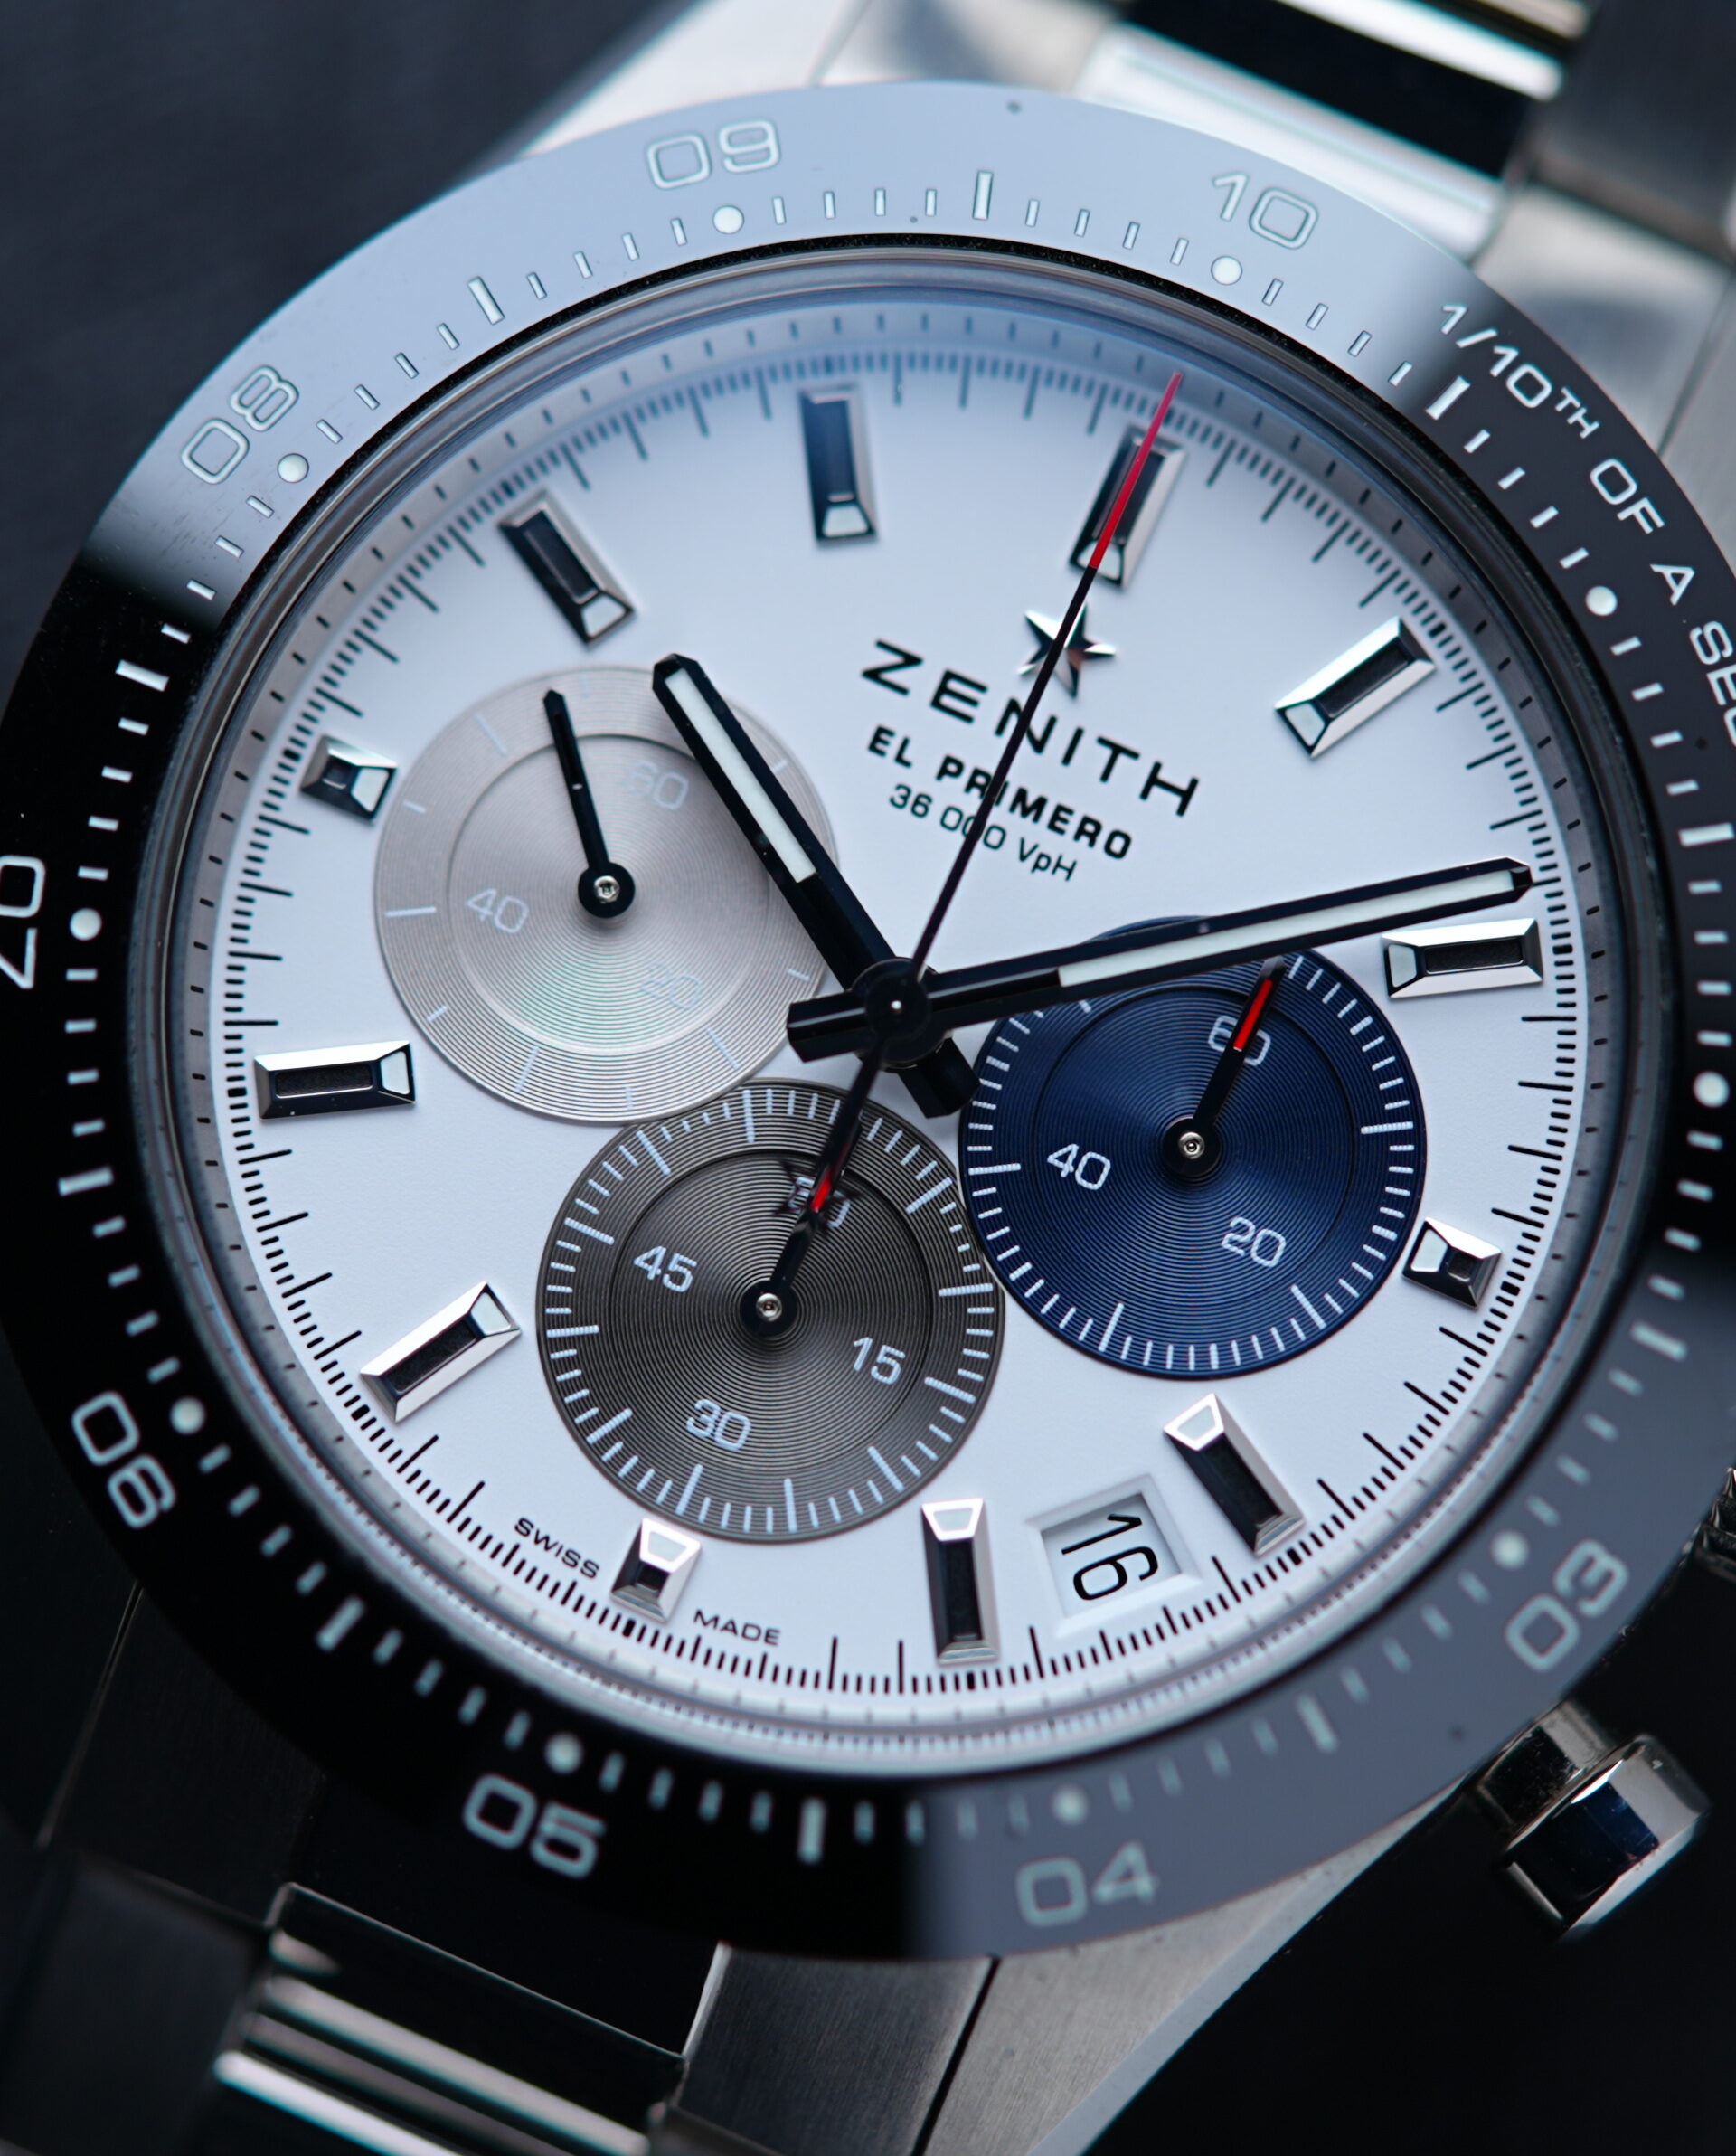 Close up picture of the Zenith Chronomaster Sport Panda watch.